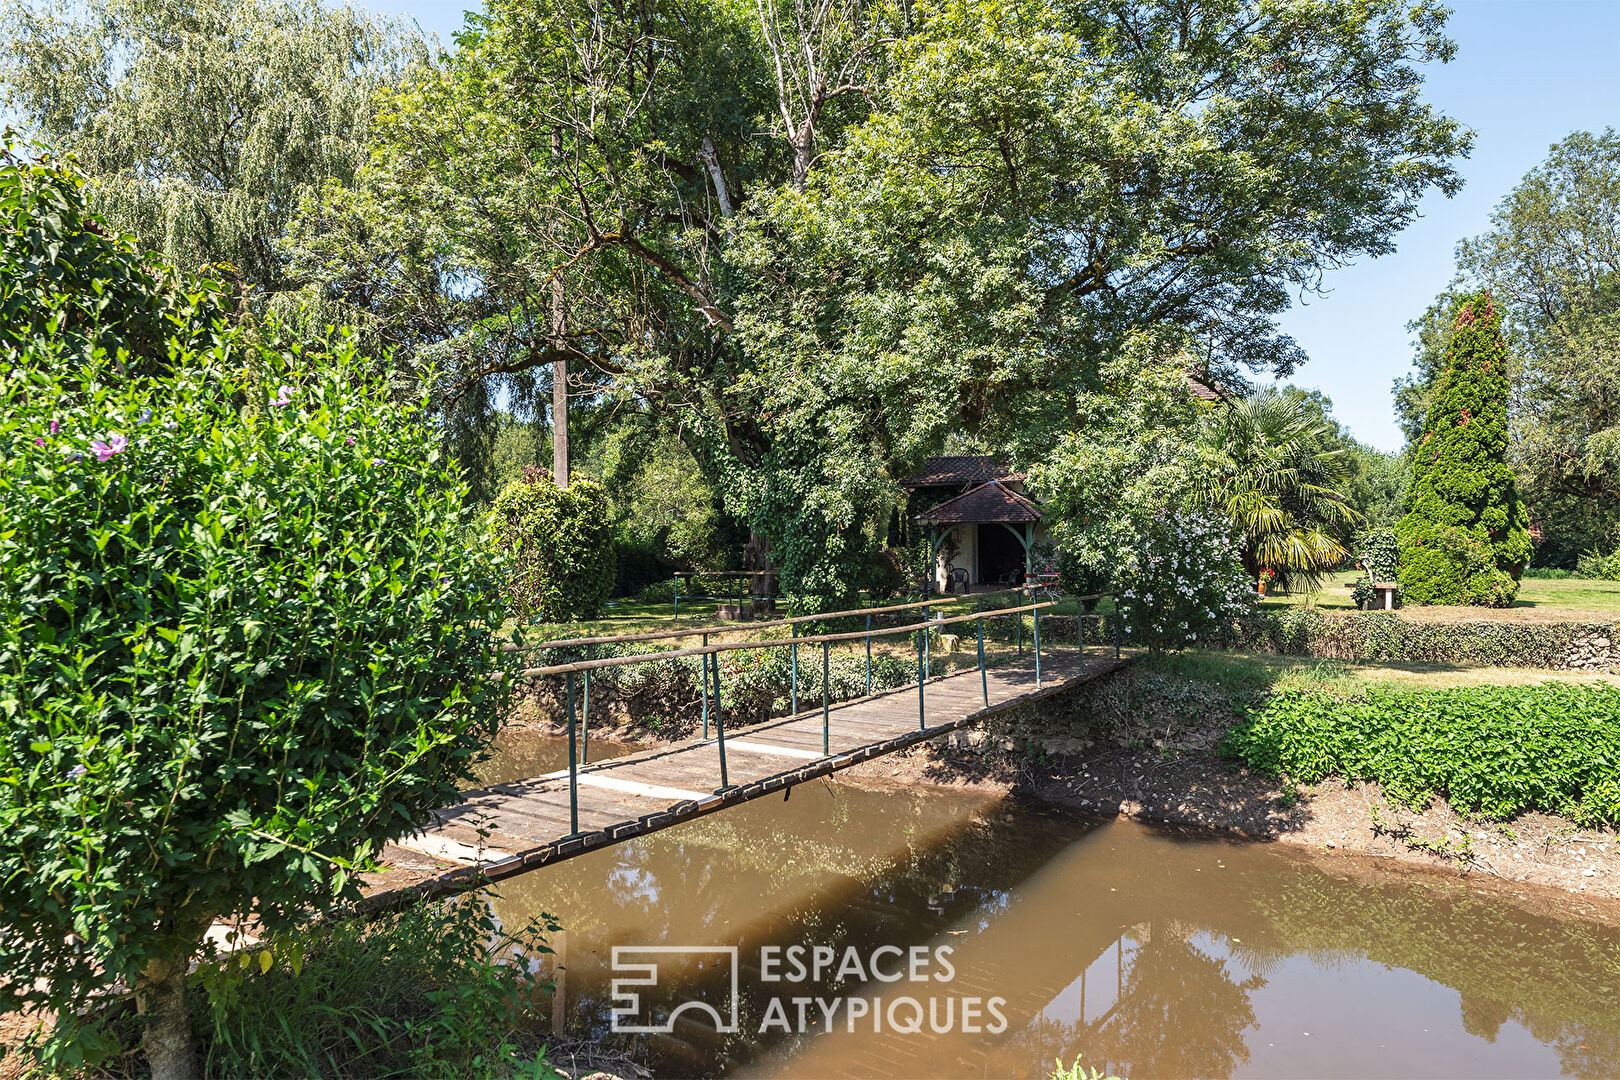 17th century mill in Périgord, a setting of serenity and elegance